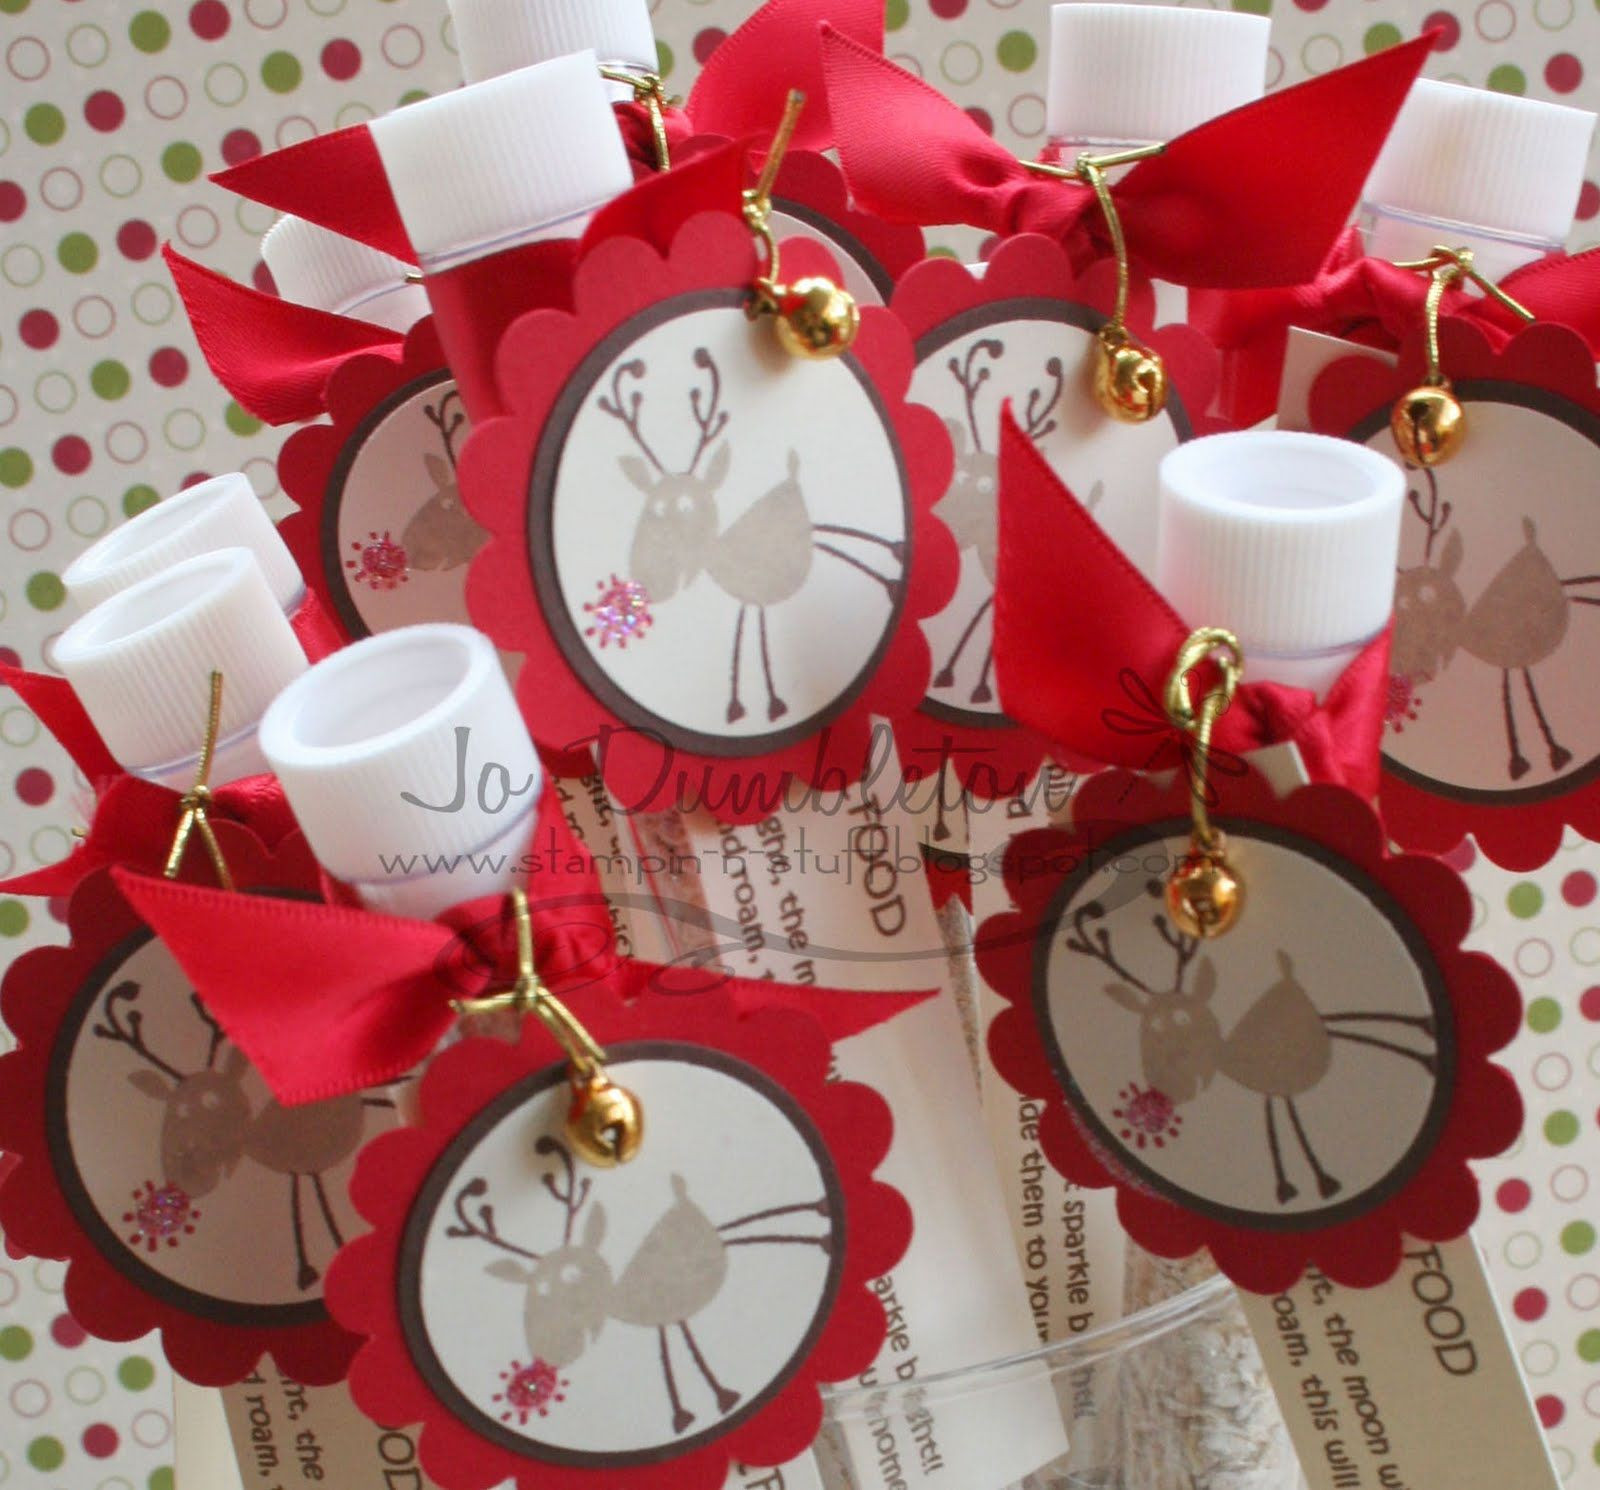 Christmas Craft Ideas For Adults To Sell
 Craft Ideas to Sell